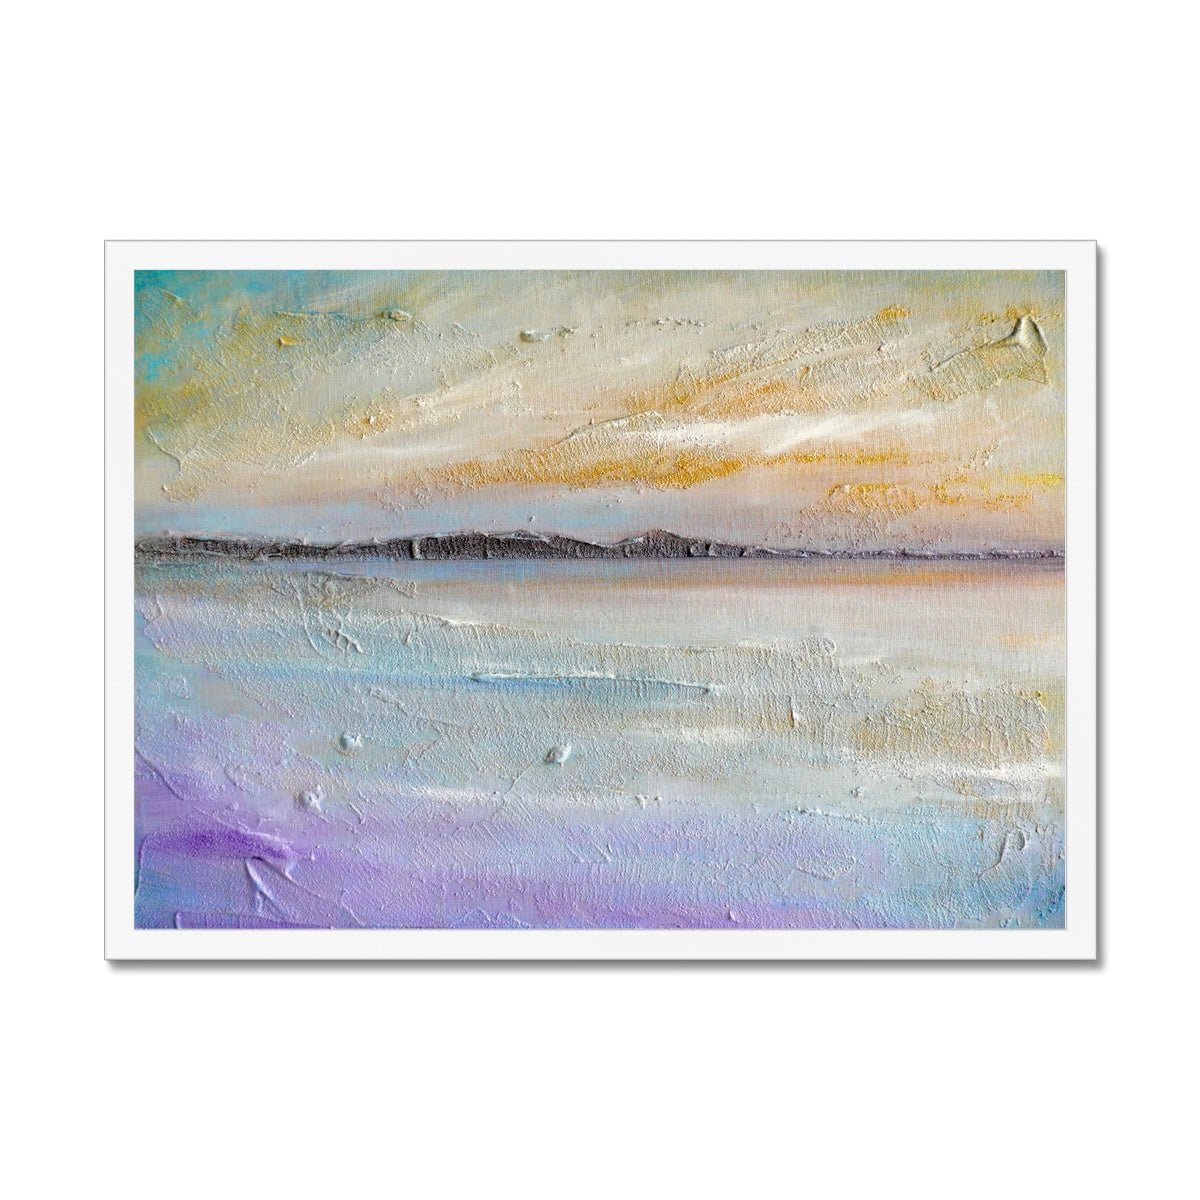 Sollas Beach North Uist Painting | Framed Prints From Scotland-Framed Prints-Hebridean Islands Art Gallery-A2 Landscape-White Frame-Paintings, Prints, Homeware, Art Gifts From Scotland By Scottish Artist Kevin Hunter